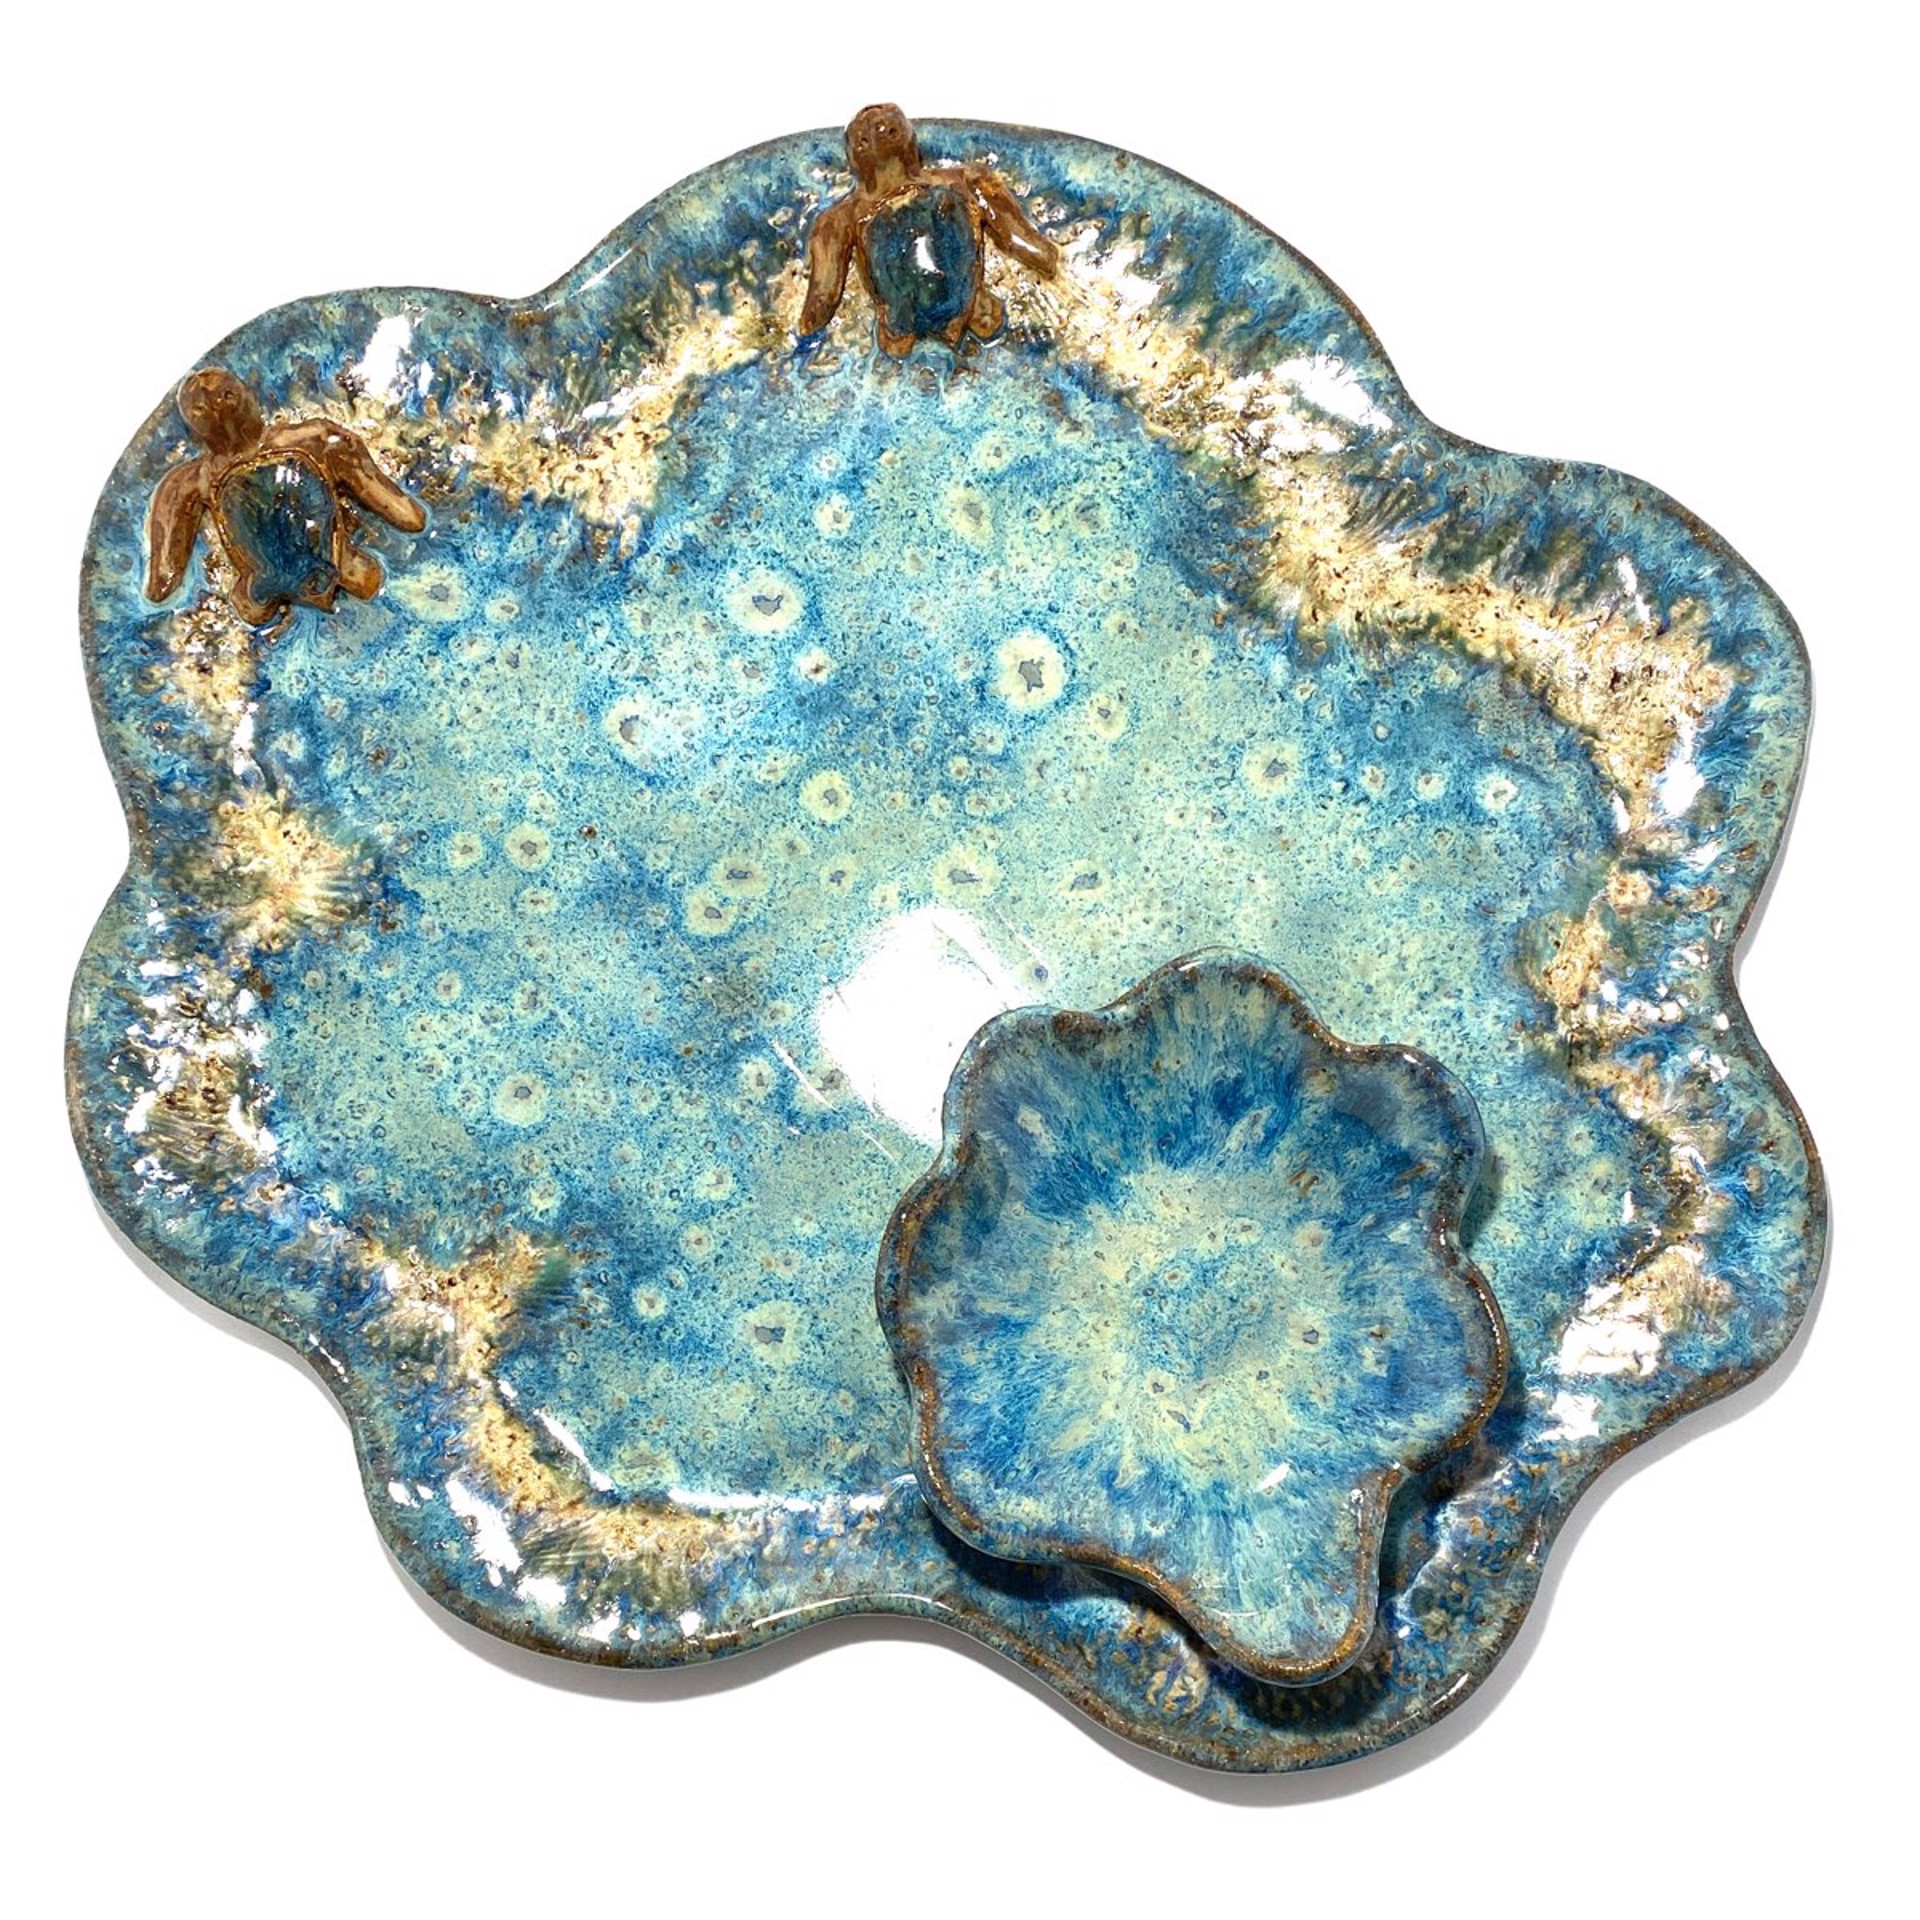 Chip and Dip with Two Turtles (Blue Glaze) LG23-1111 by Jim & Steffi Logan